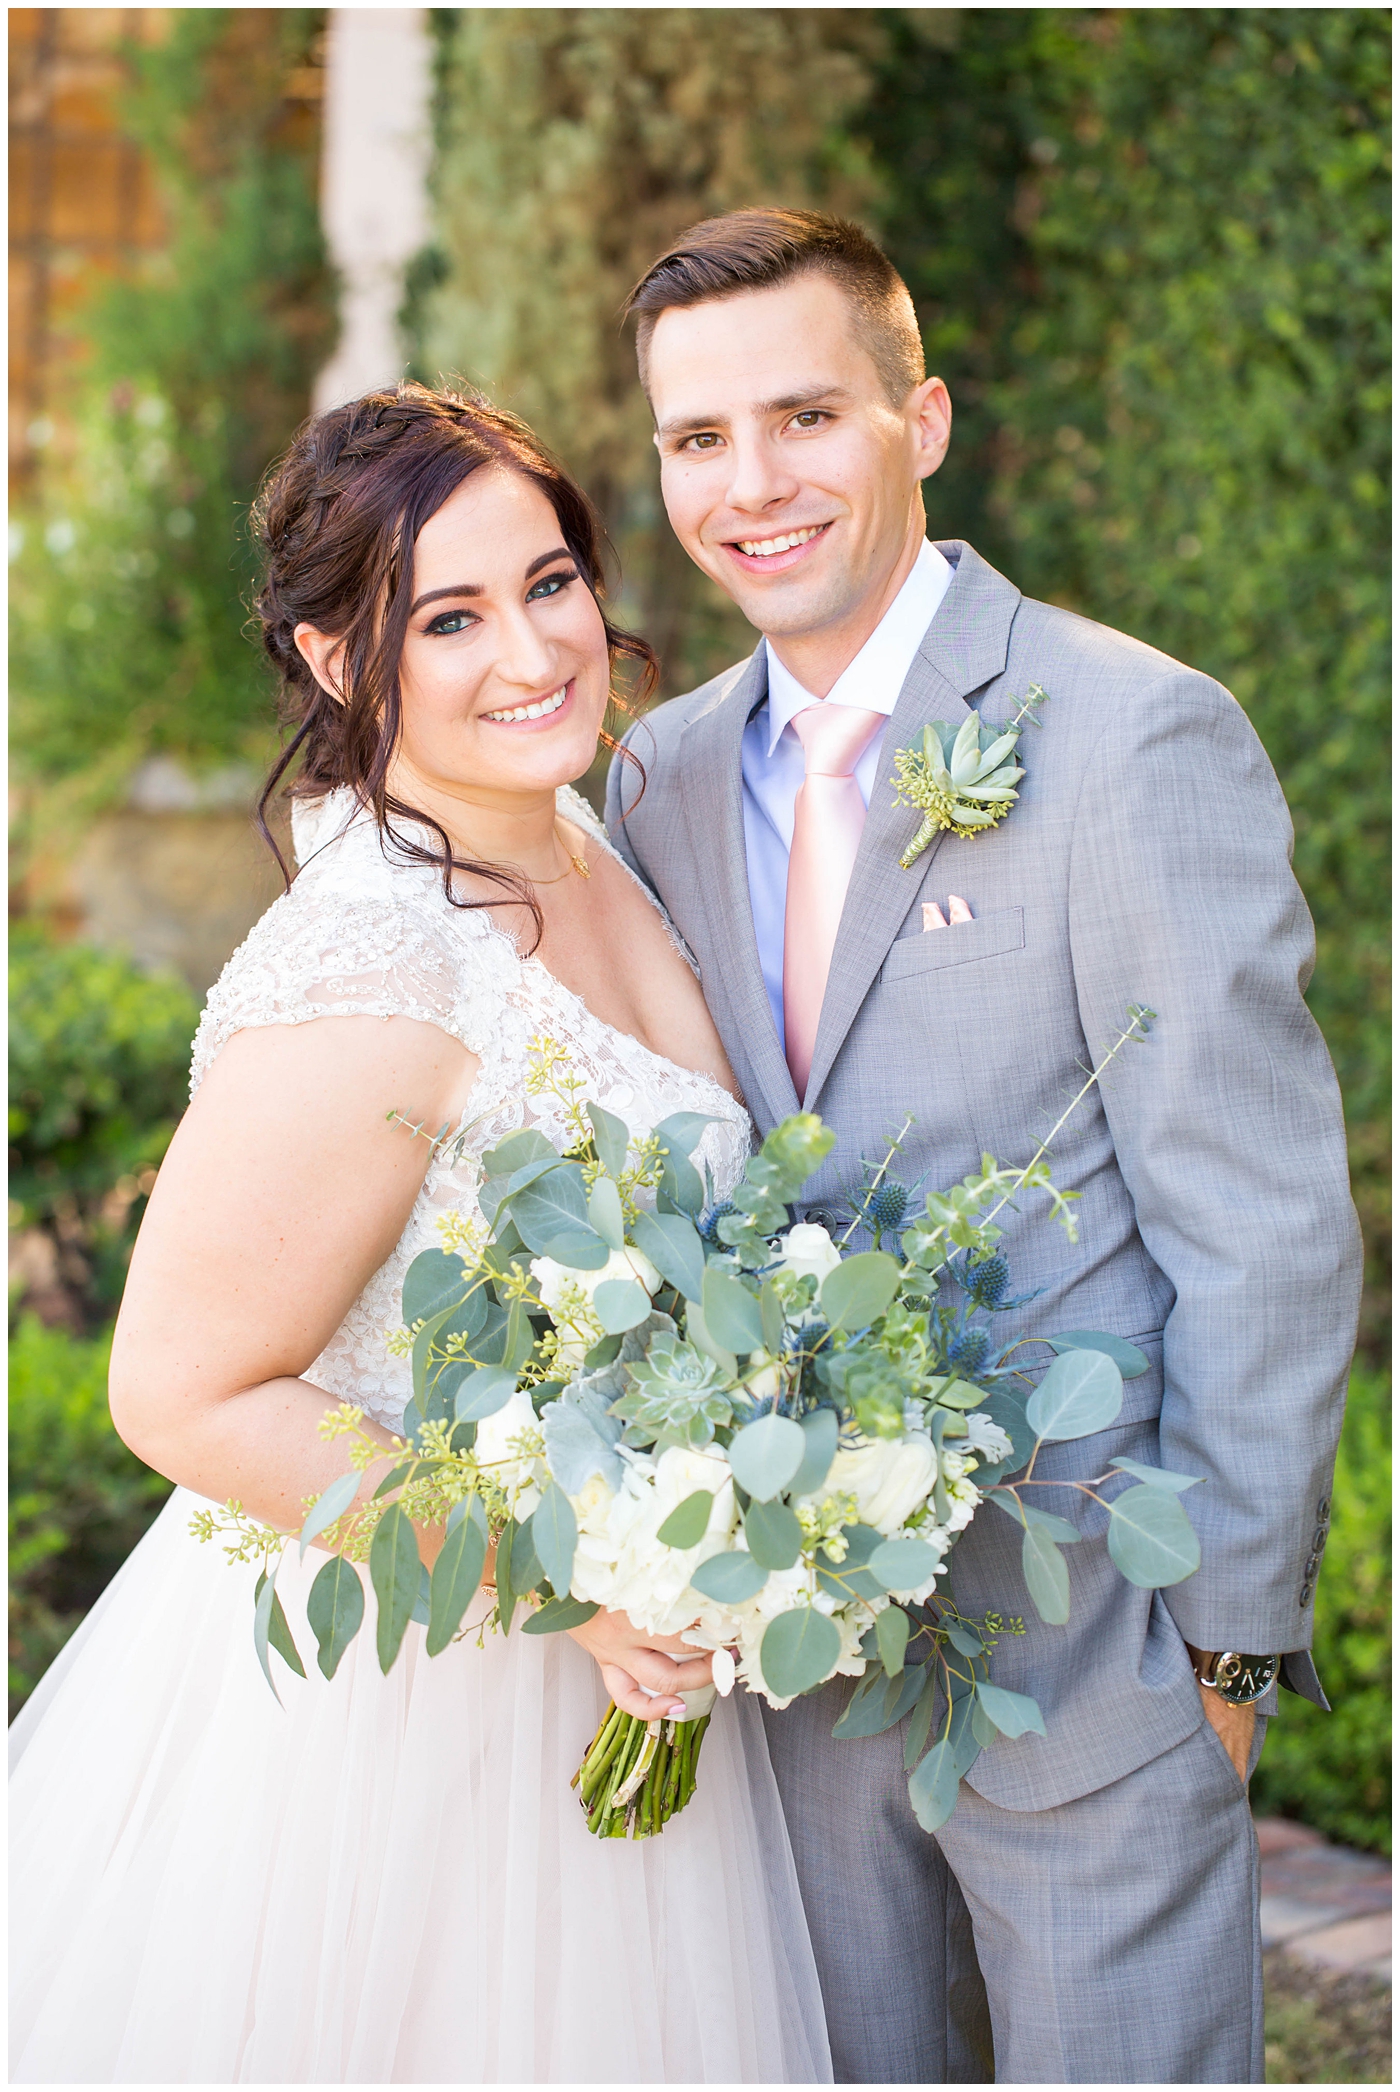 Bride in sleeved white dress and groom in gray jacket